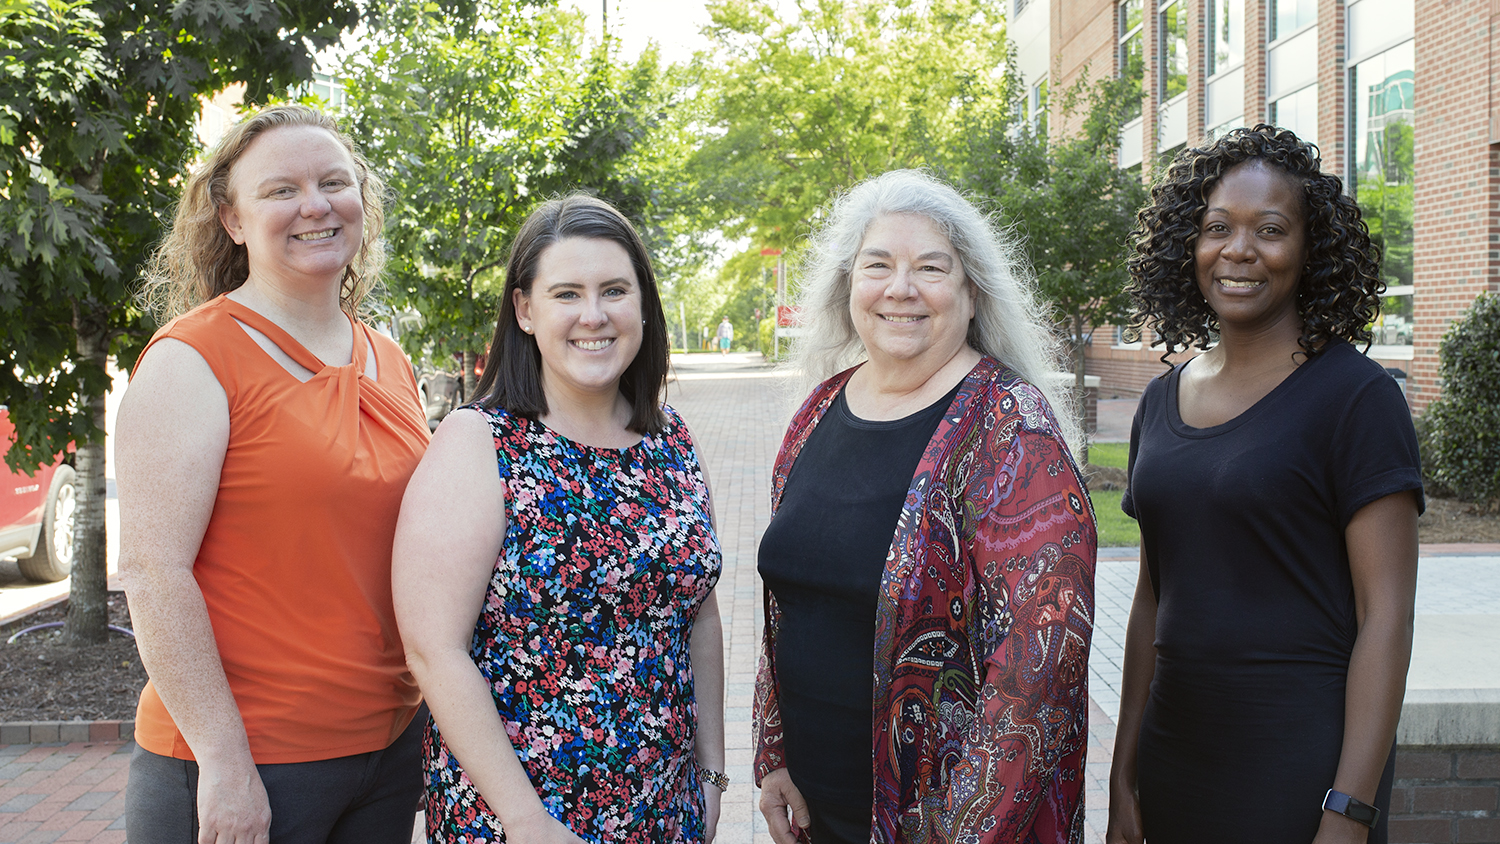 From left to right: Suzie Goodell, Natalie Cook, Cathi Dunnagan and Jessica White.